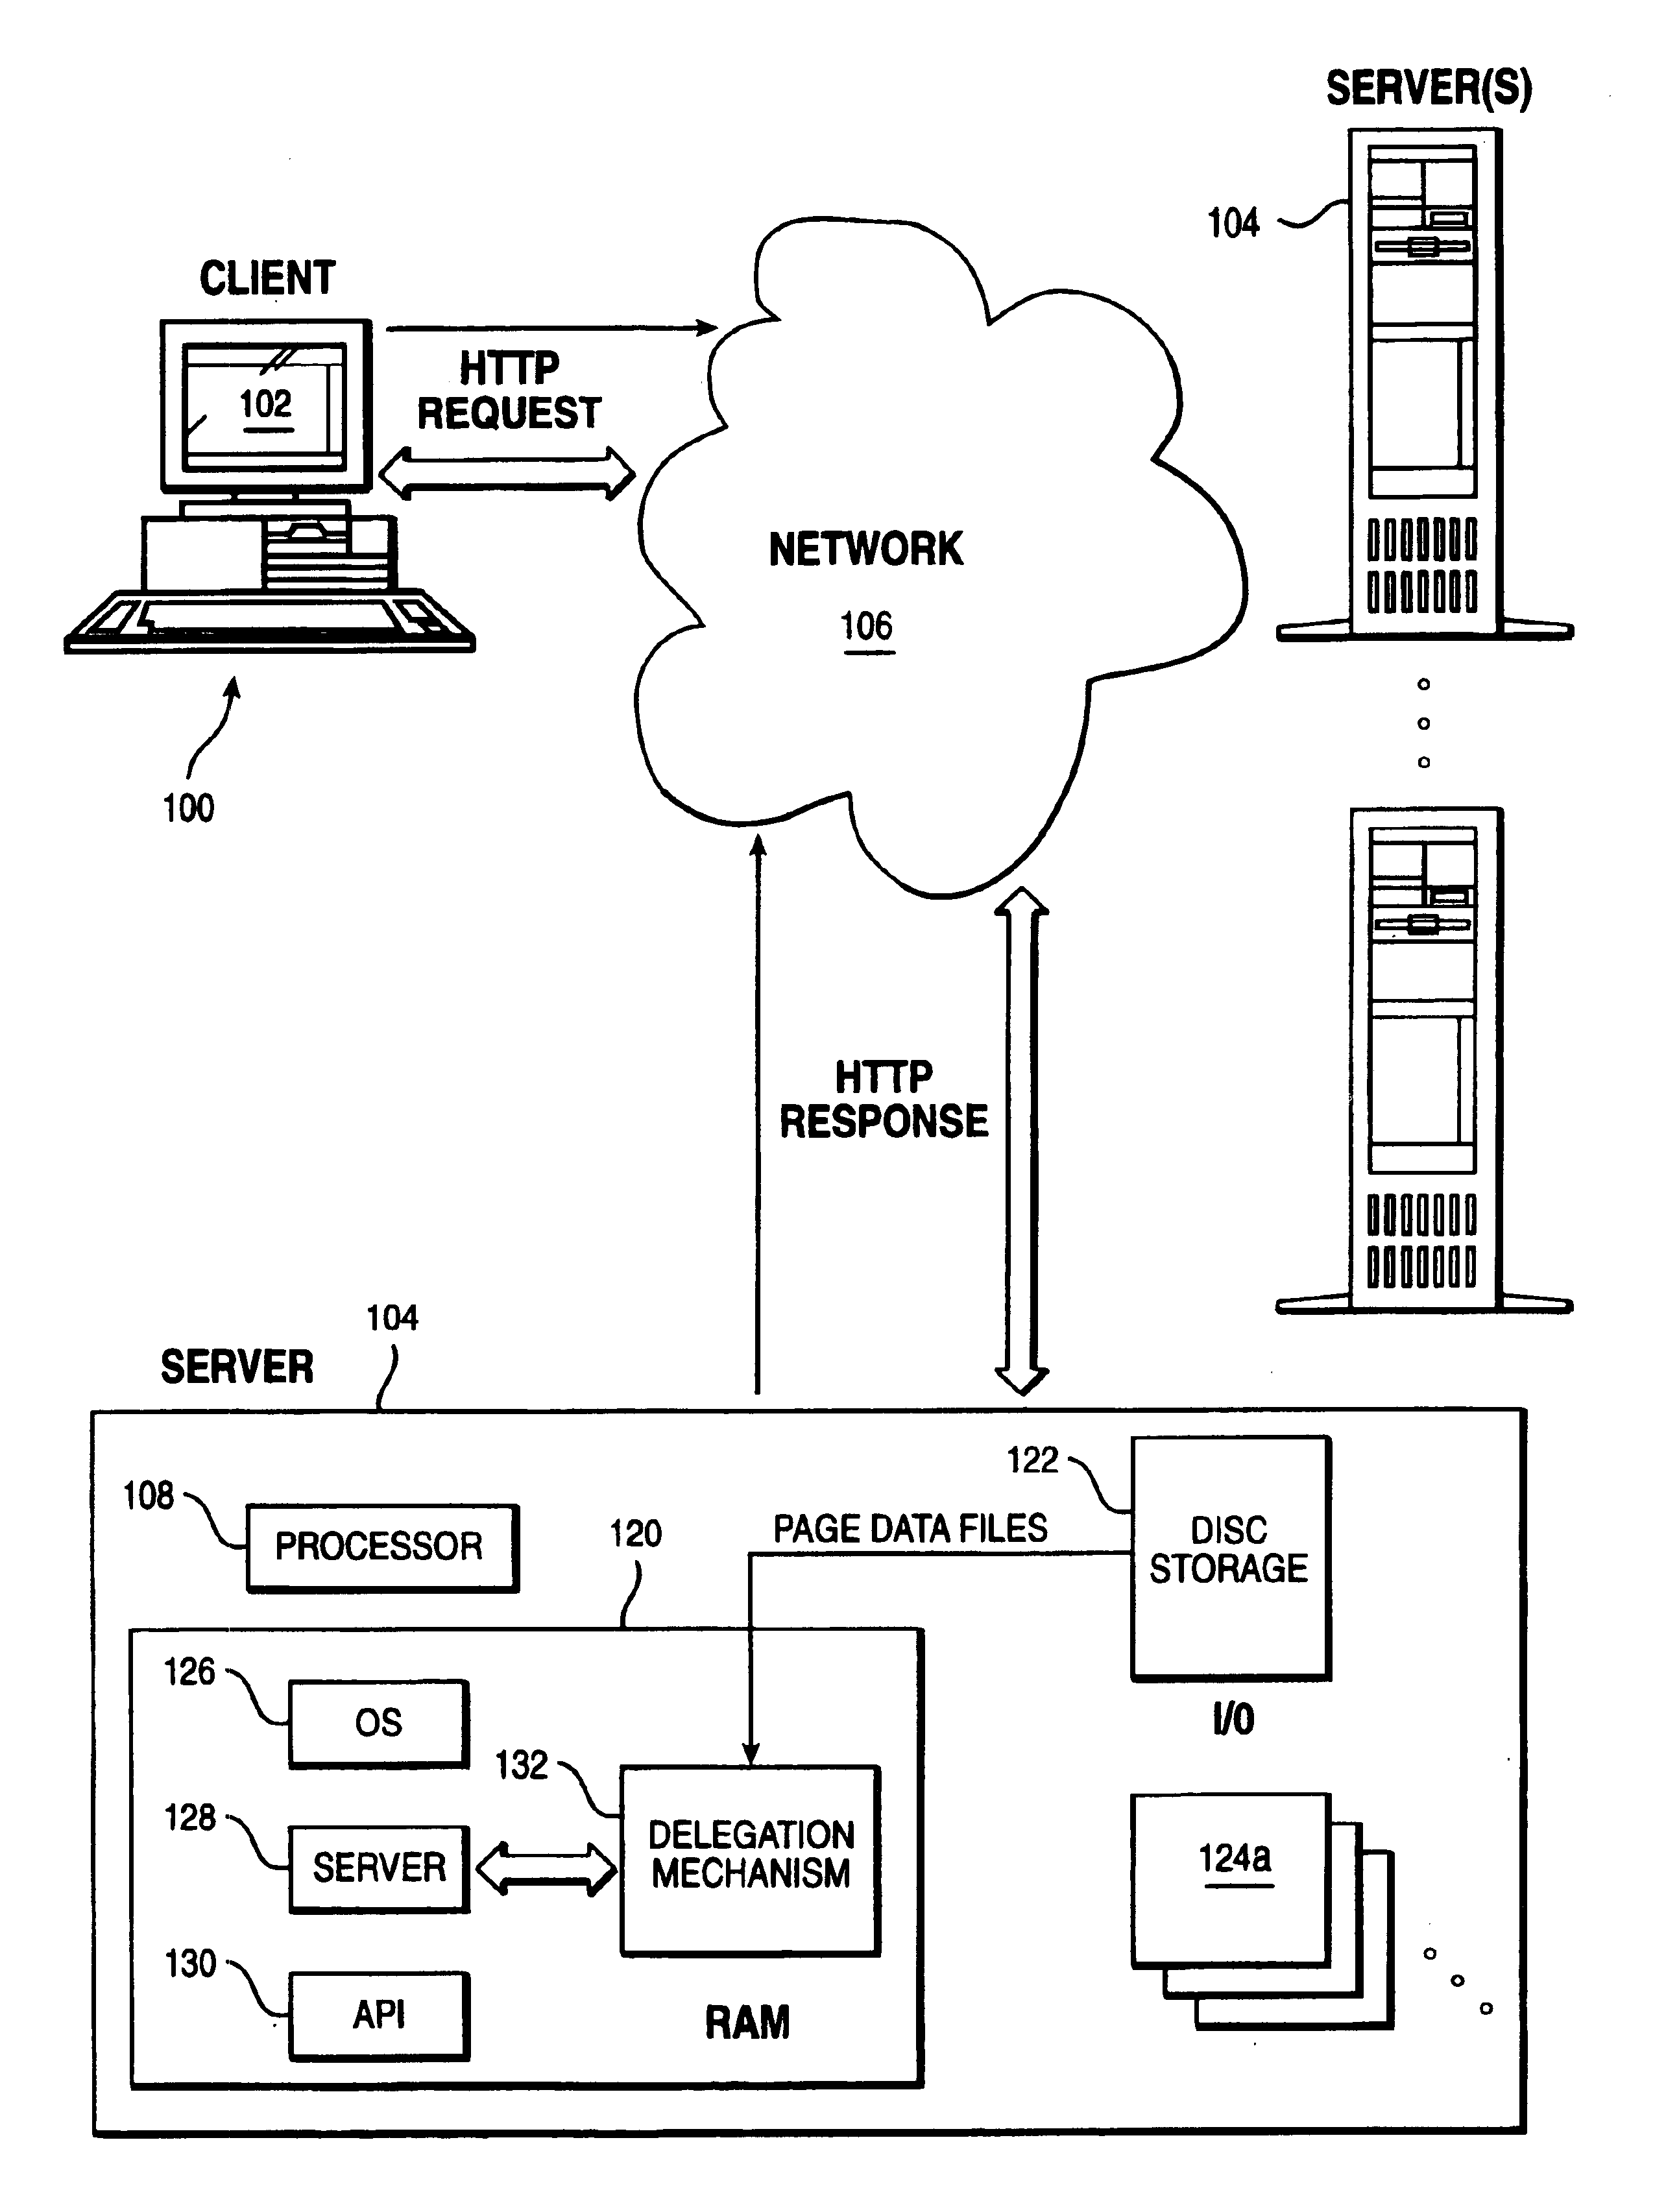 Method of enabling an intermediary server to impersonate a client user's identity to a plurality of authentication domains